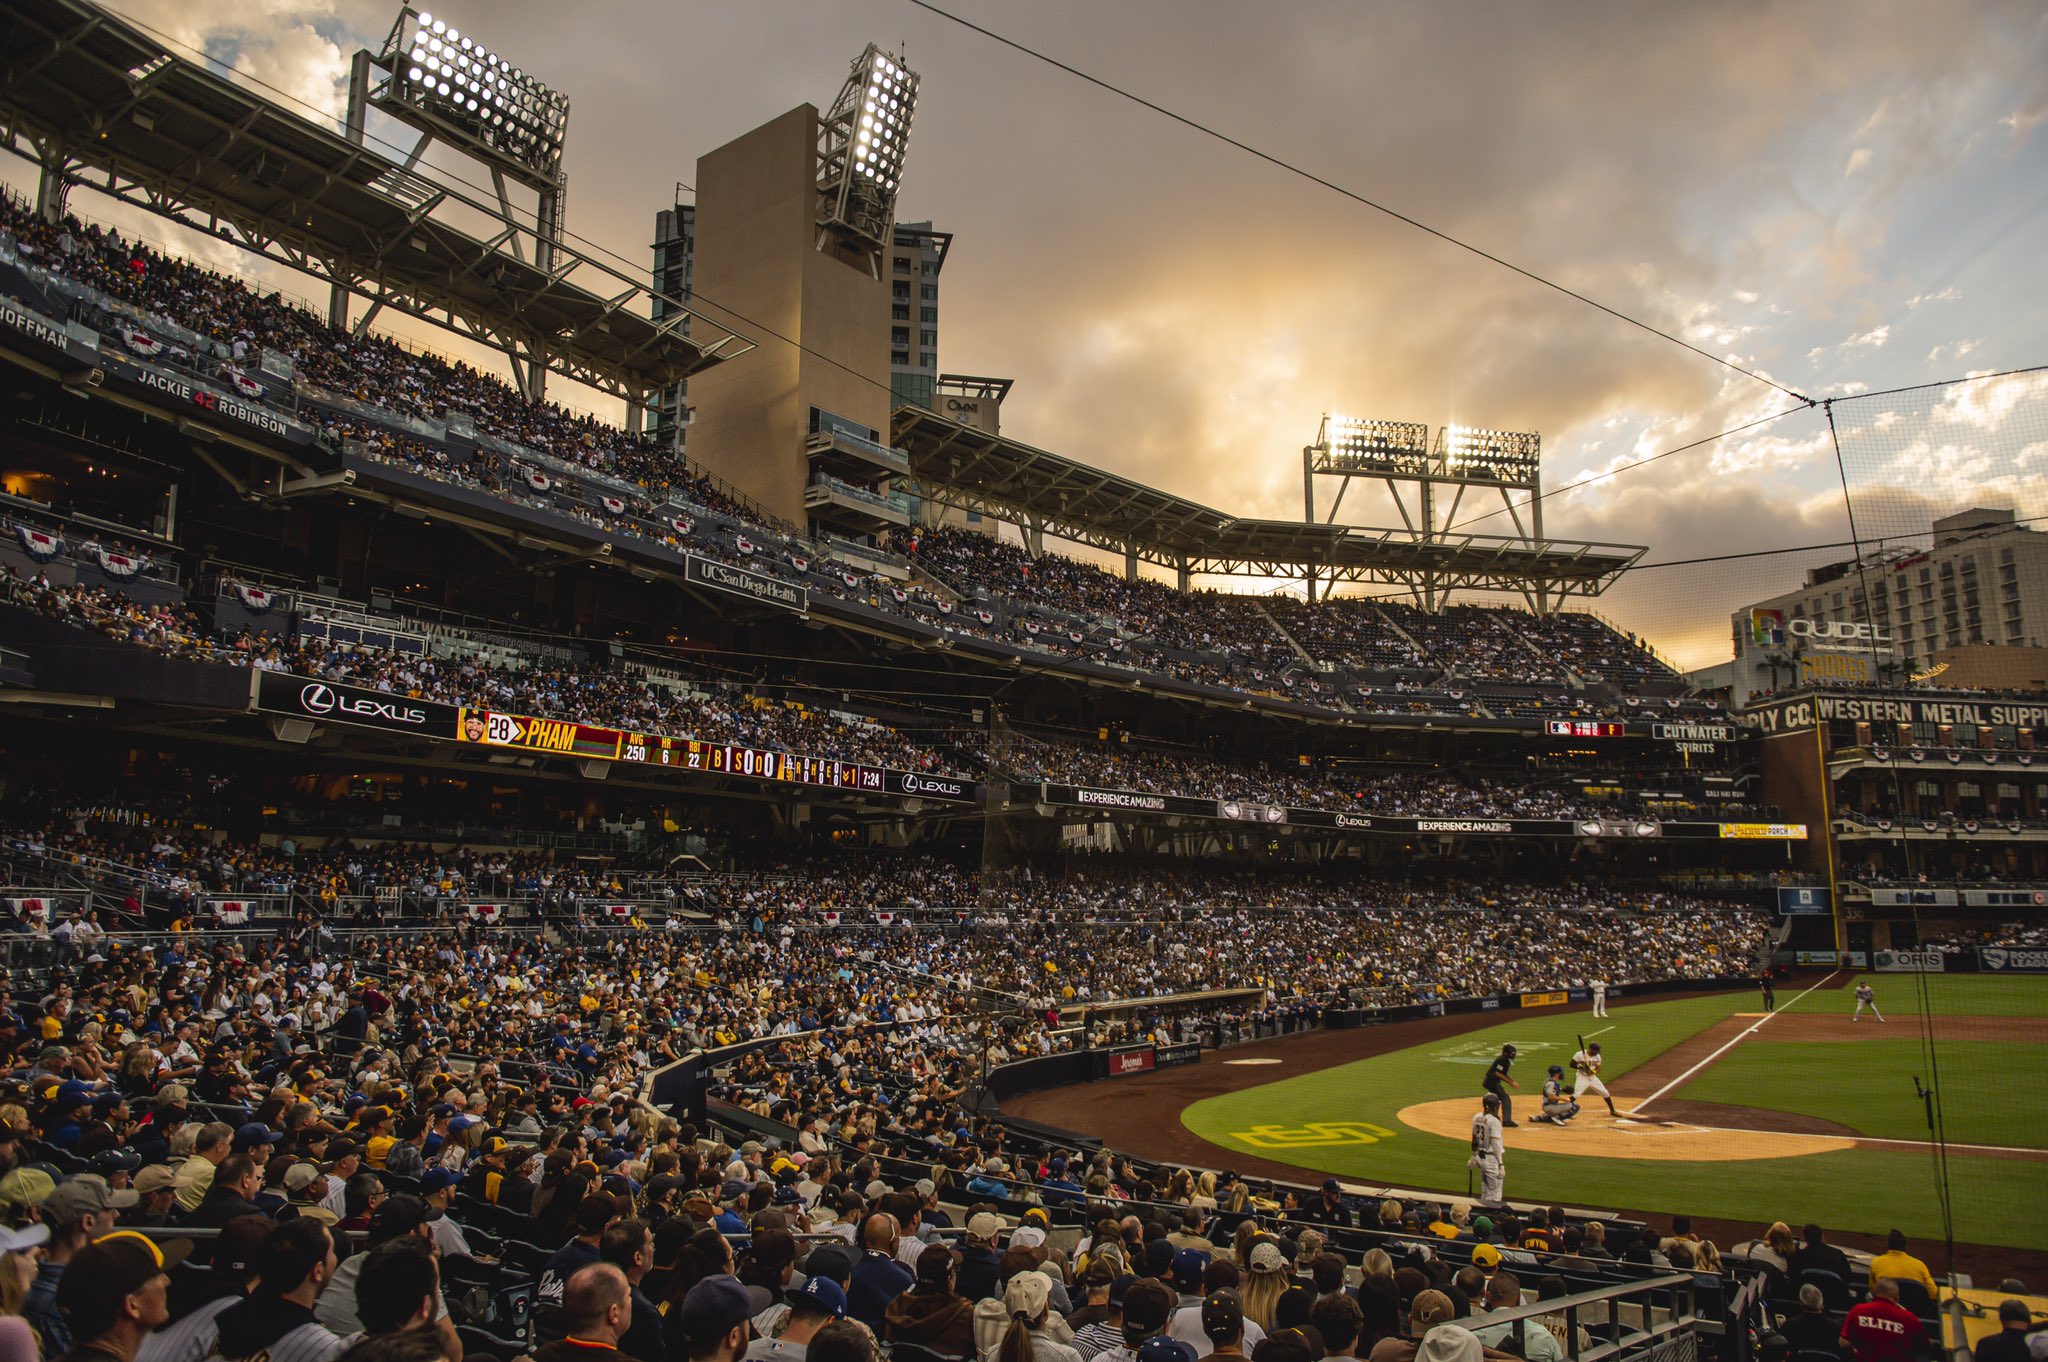 San Diego Padres on X: Another night, another @clickup save for